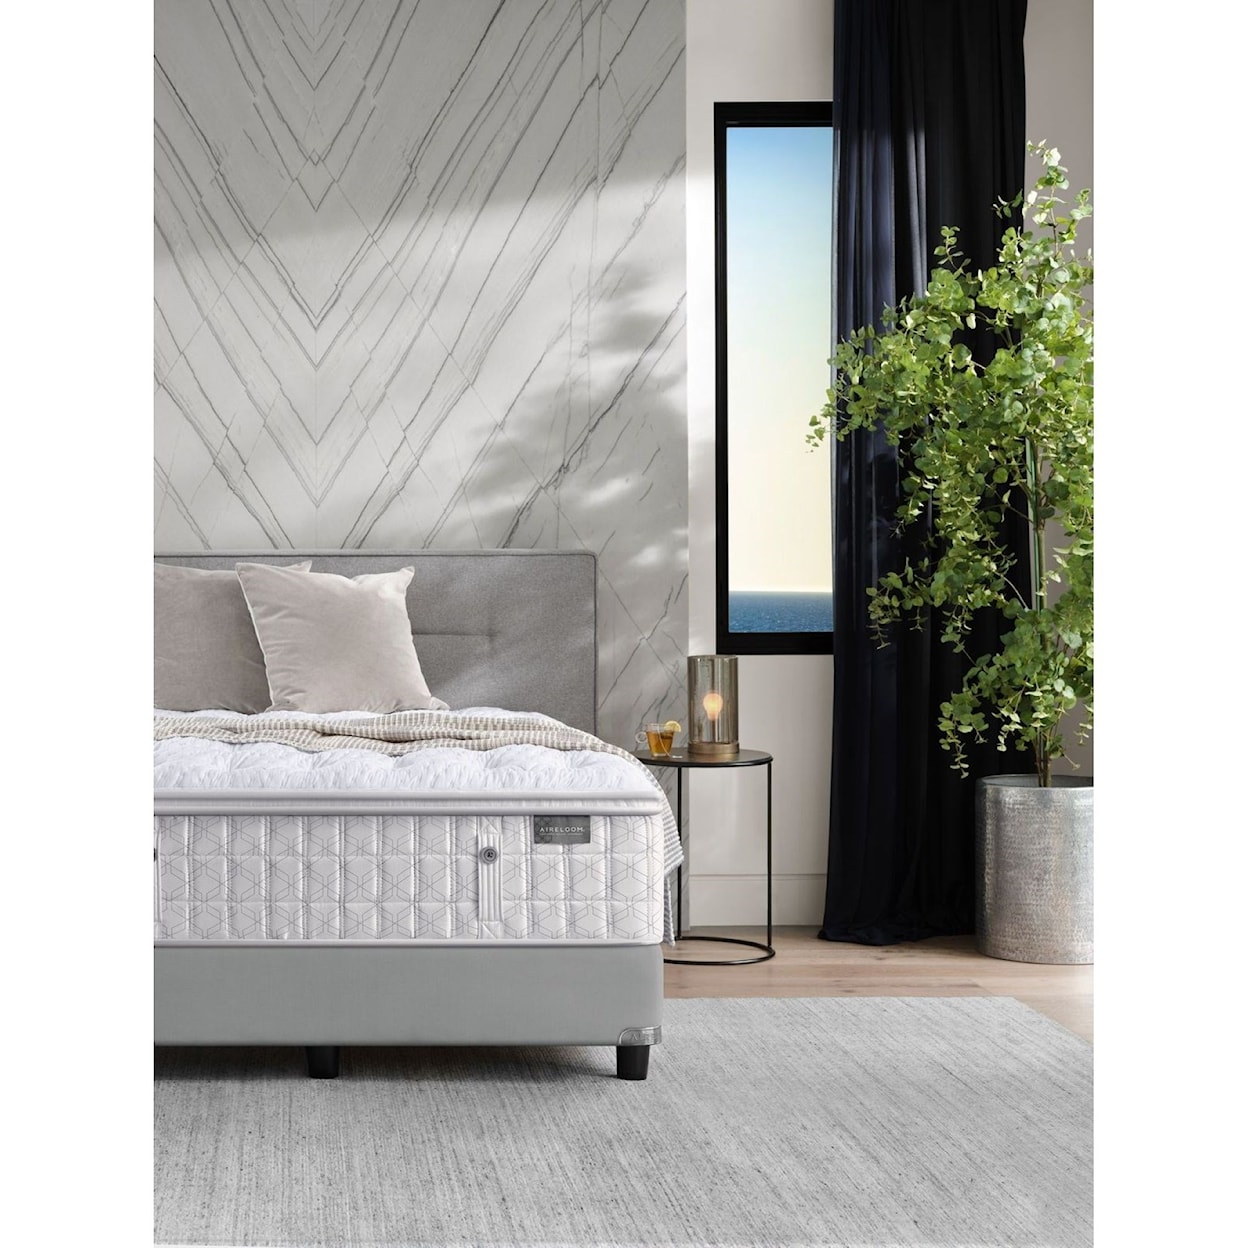 Aireloom Bedding Timeless Odyssey Luxetop Firm M2 Cal King Luxury Firm Mattress